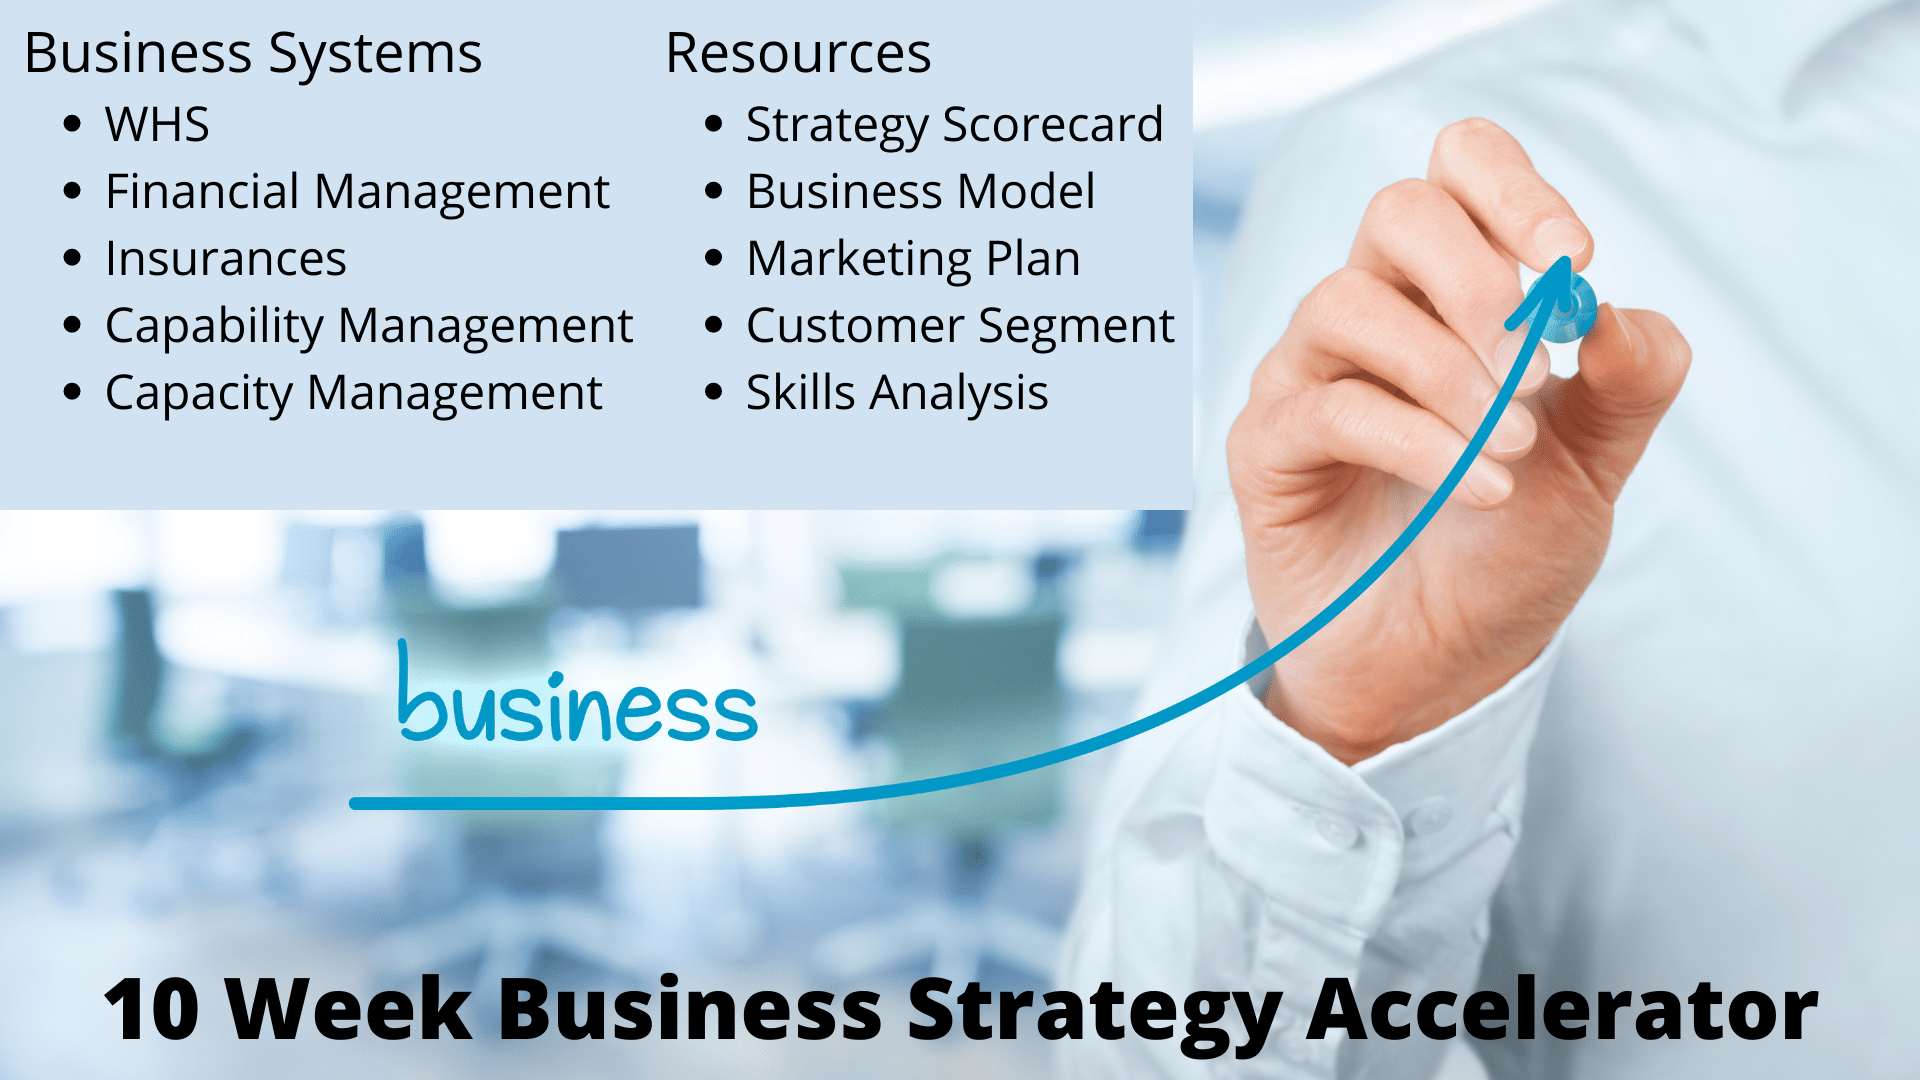 10 Week Business Strategy Acceleration Features and Benefits